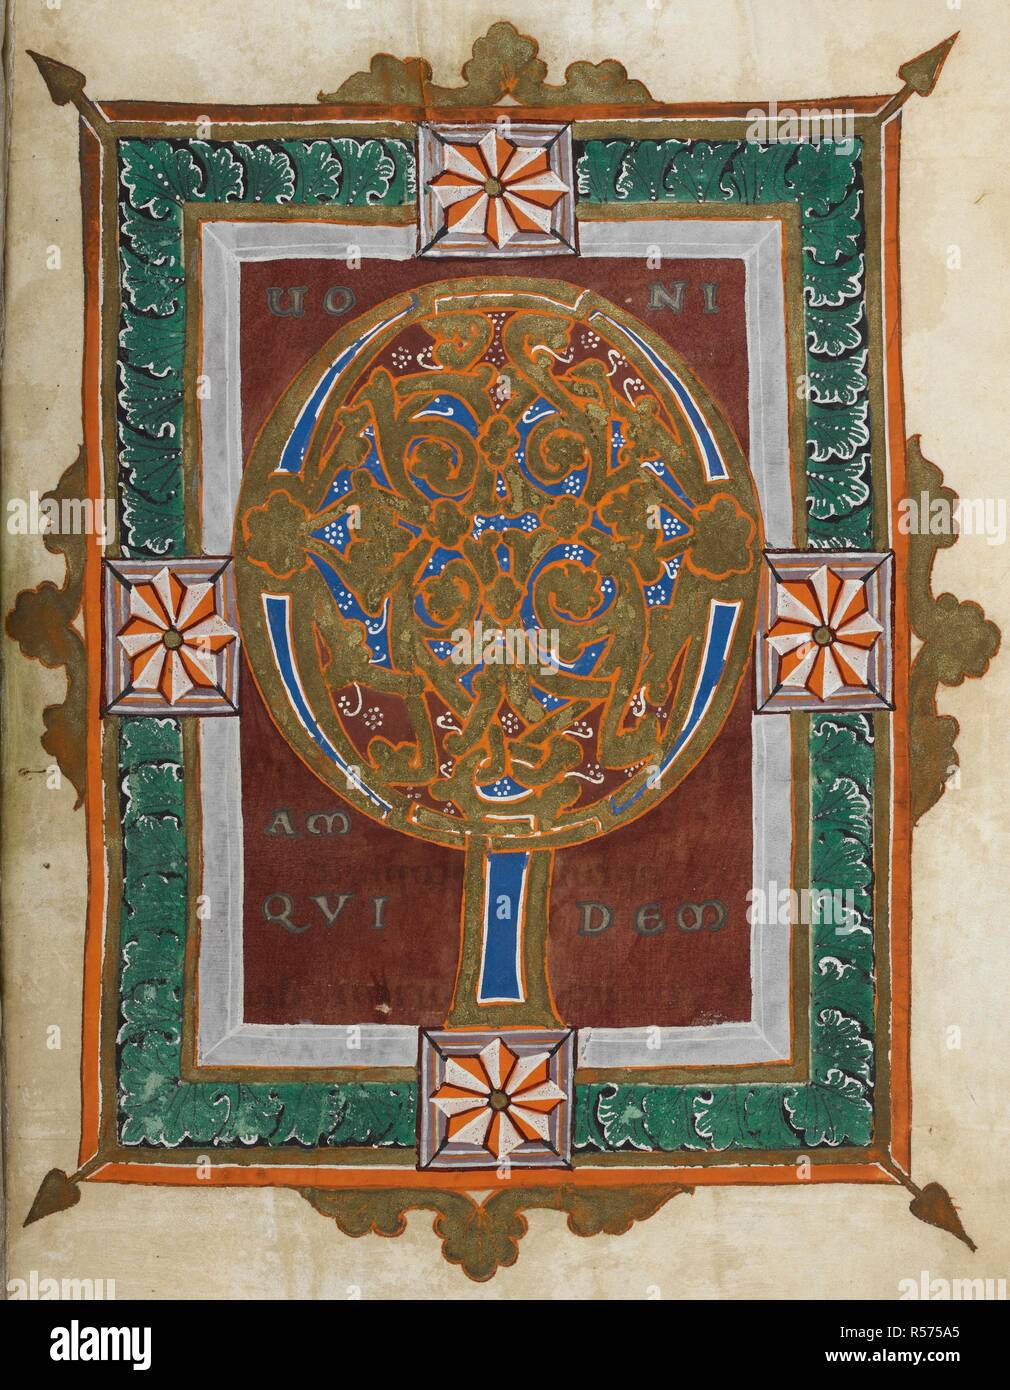 Incipit page to St Luke's Gospel, beginning with decorated initial 'Q'. Cologne Gospels. Germany [Cologne]; between 1070 and 1080. Source: Harley 2820, f.121. Language: Latin. Stock Photo